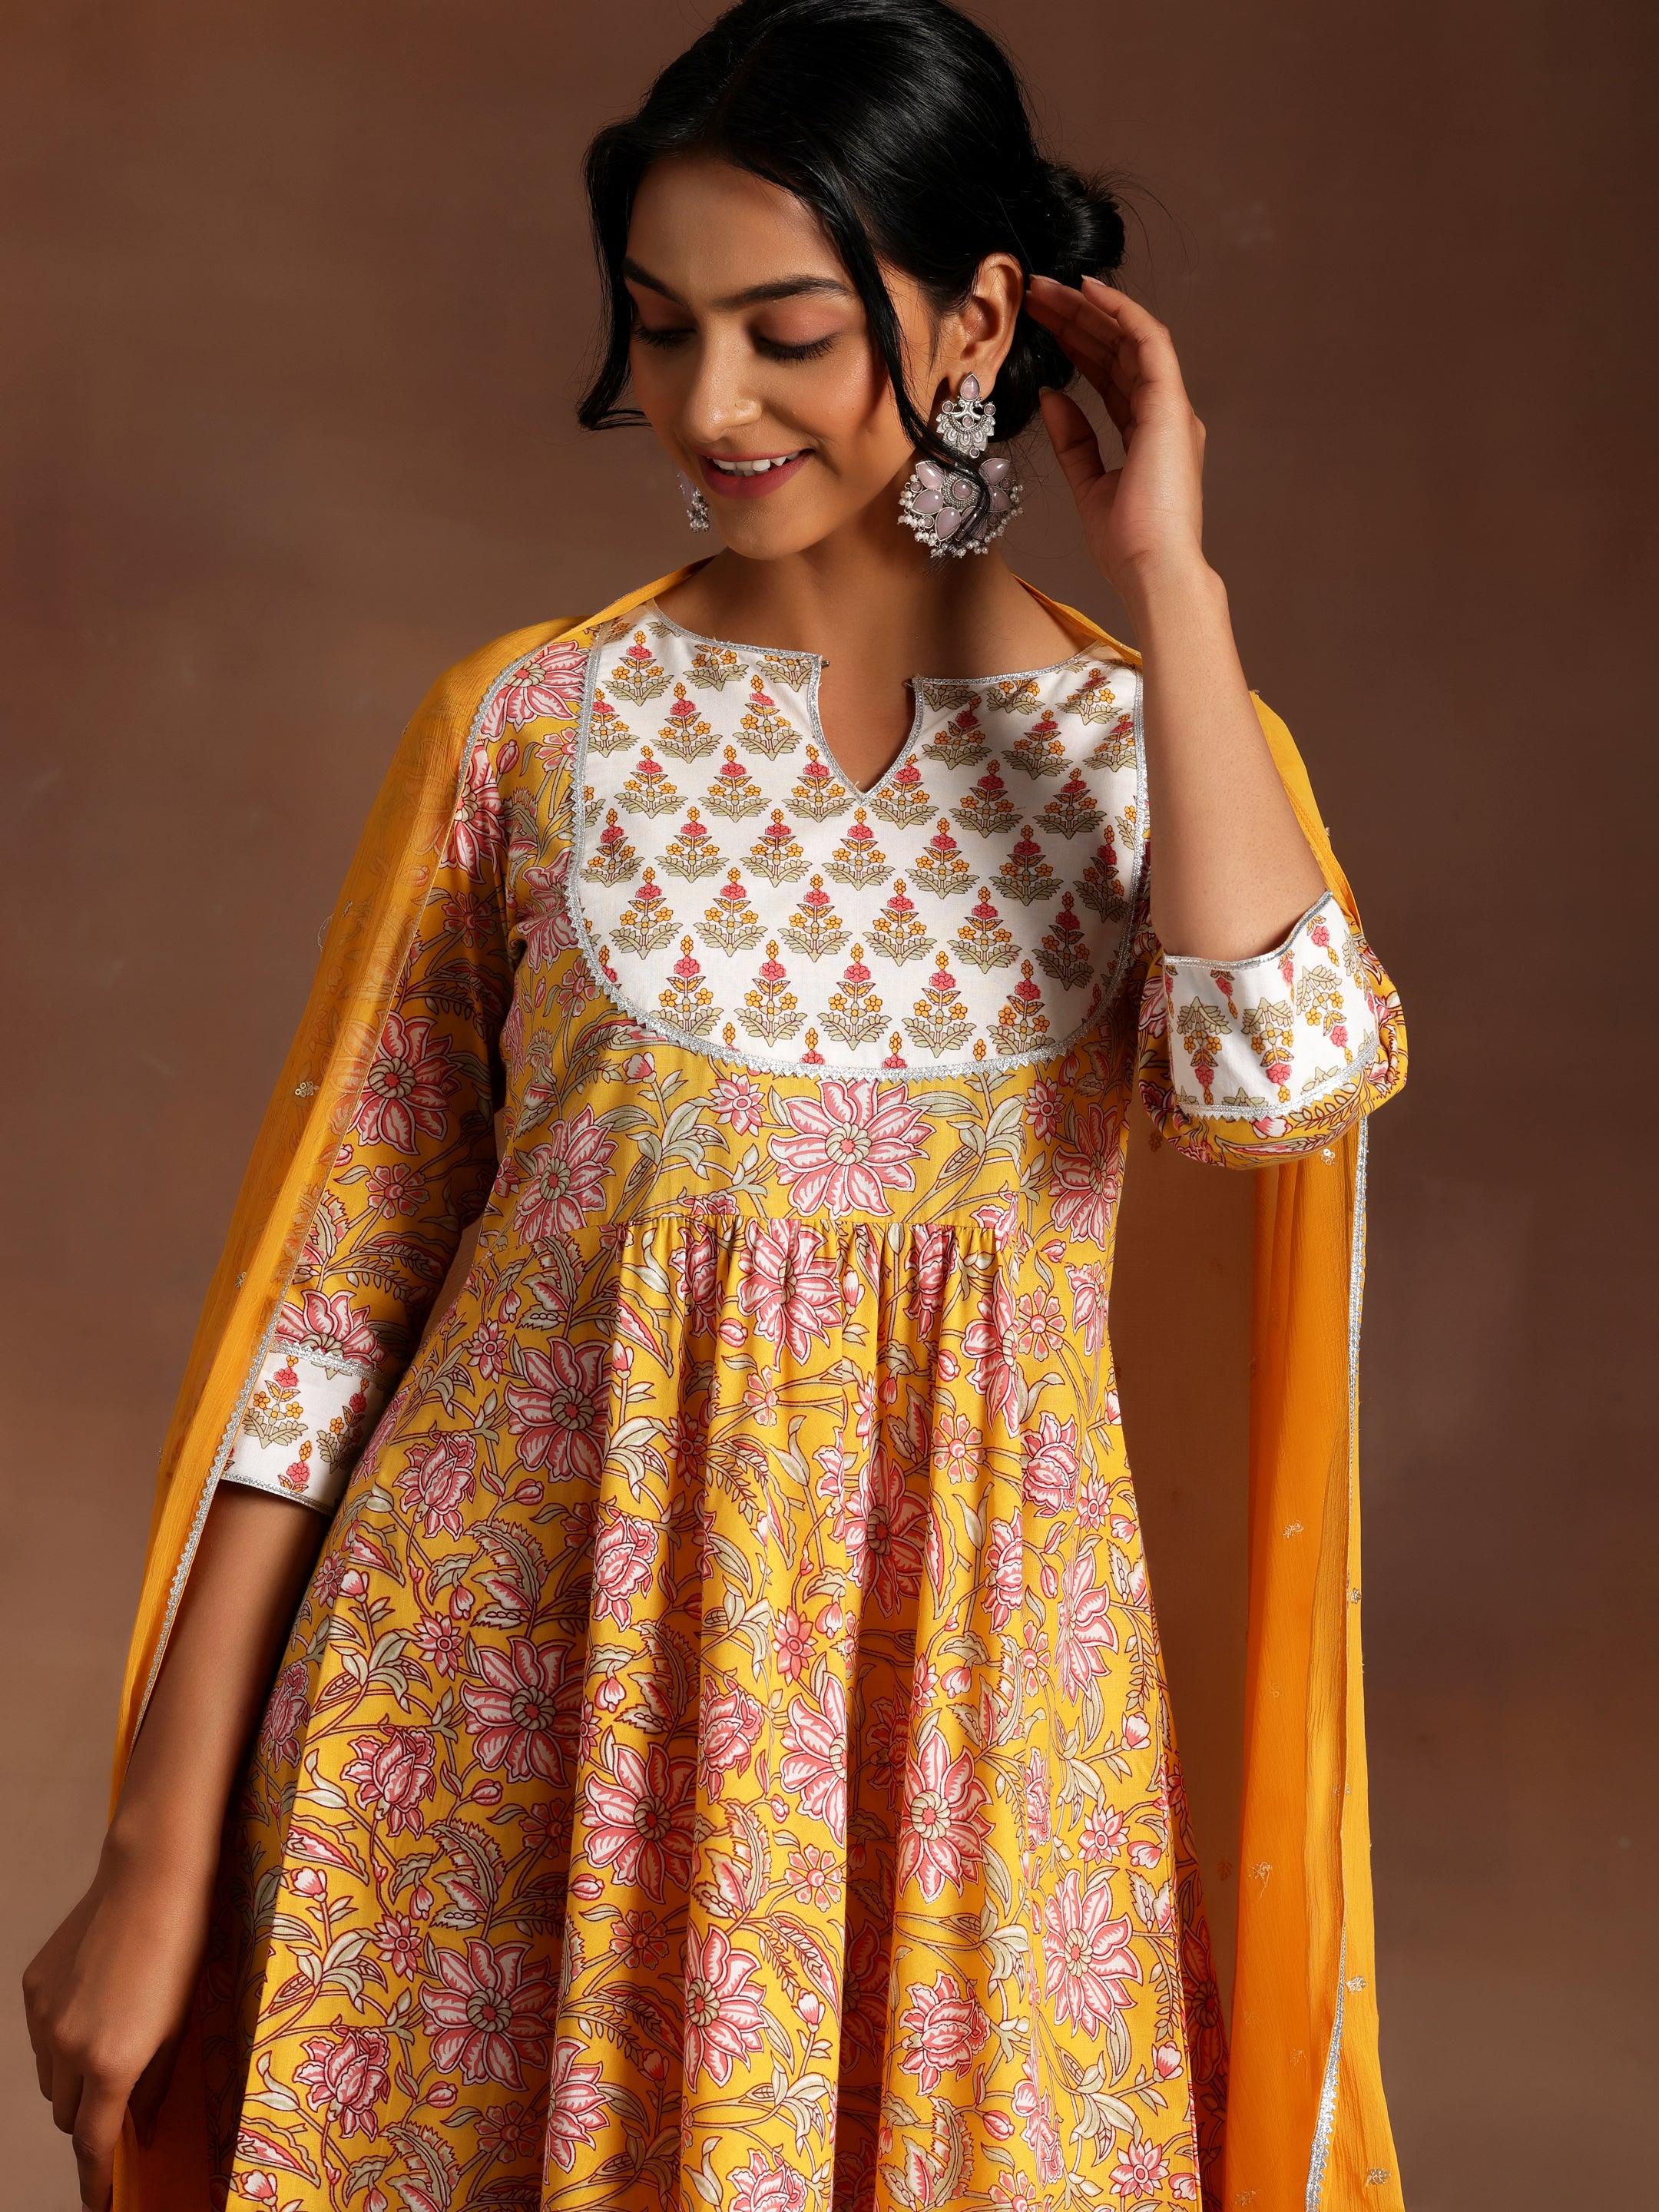 Yellow Printed Cotton Anarkali Suit With Dupatta